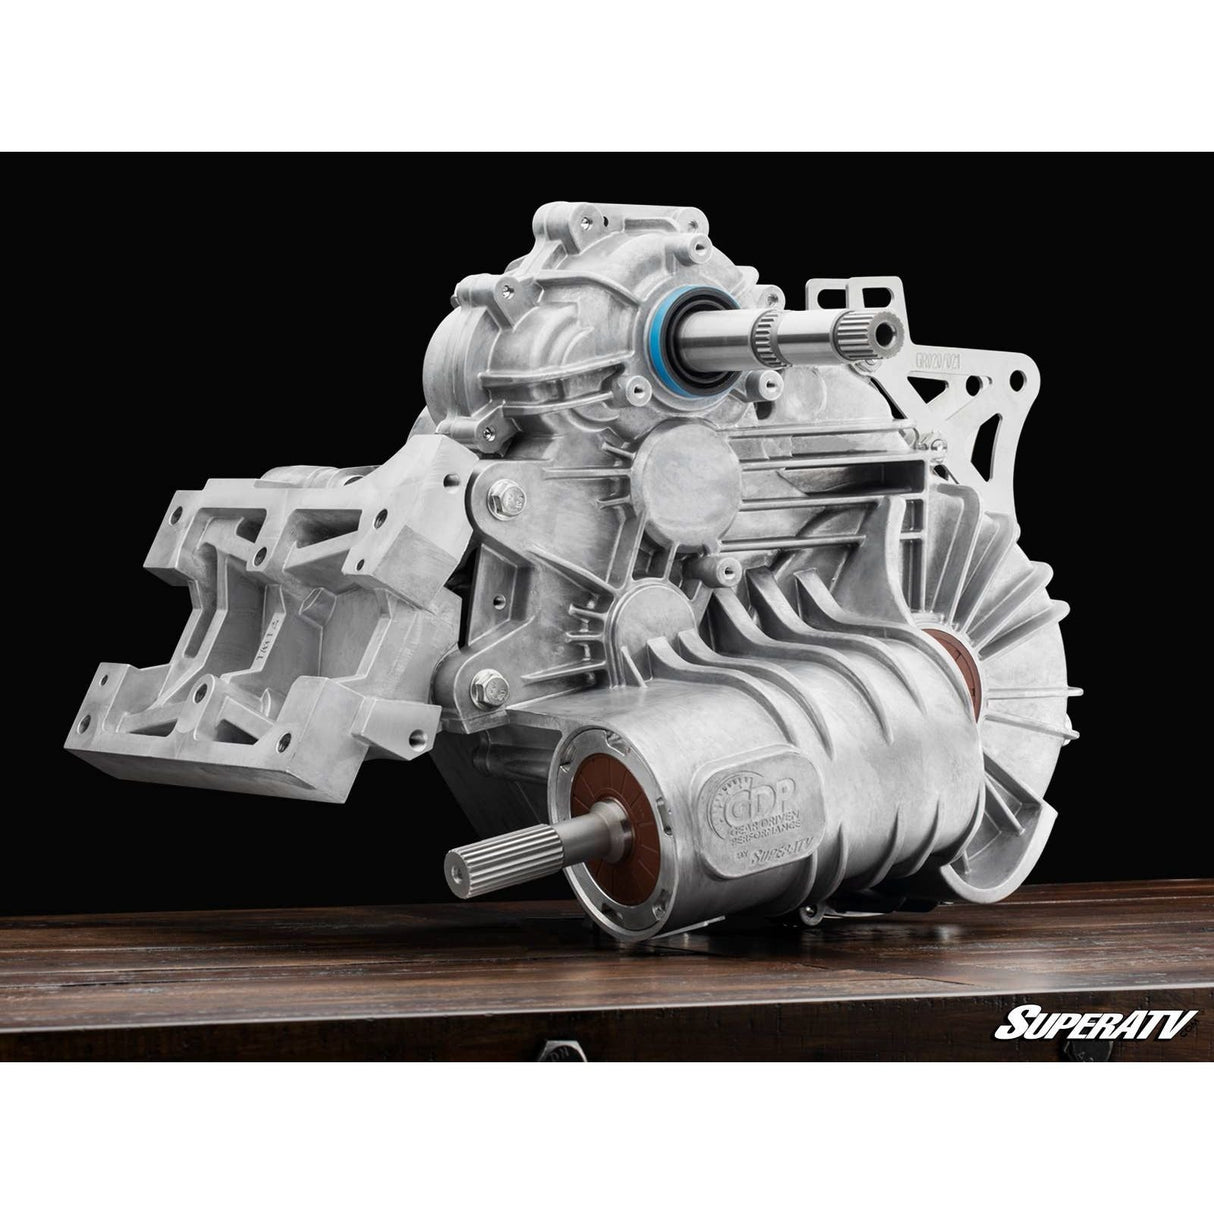 Polaris RZR Trail S 1000 Complete Geared-Reverse Transmission